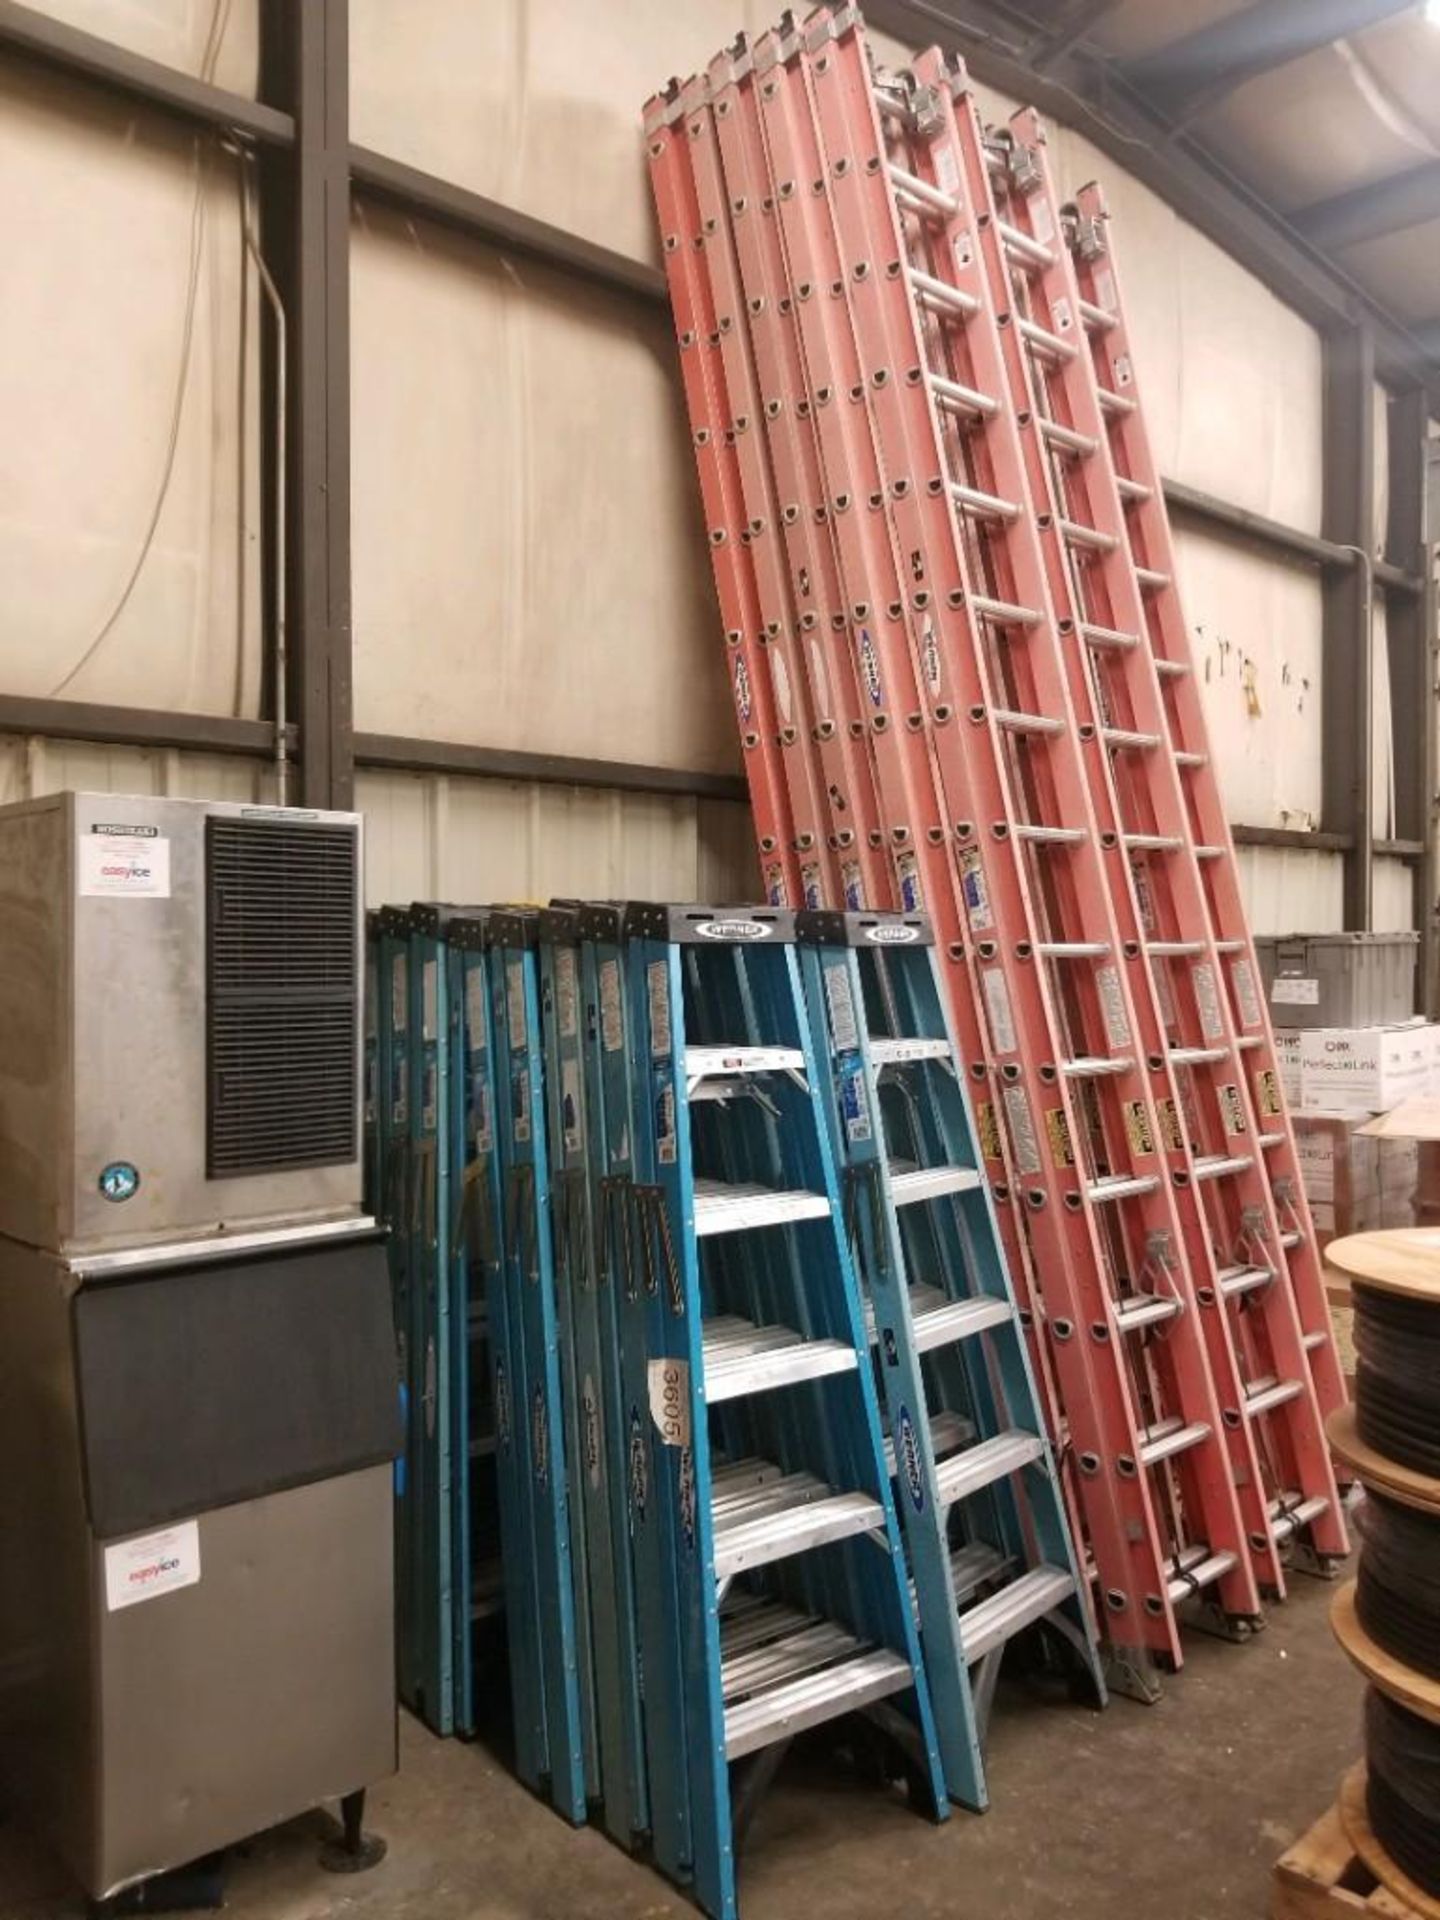 21 6' LADDERS (1 NEW 20 USED)